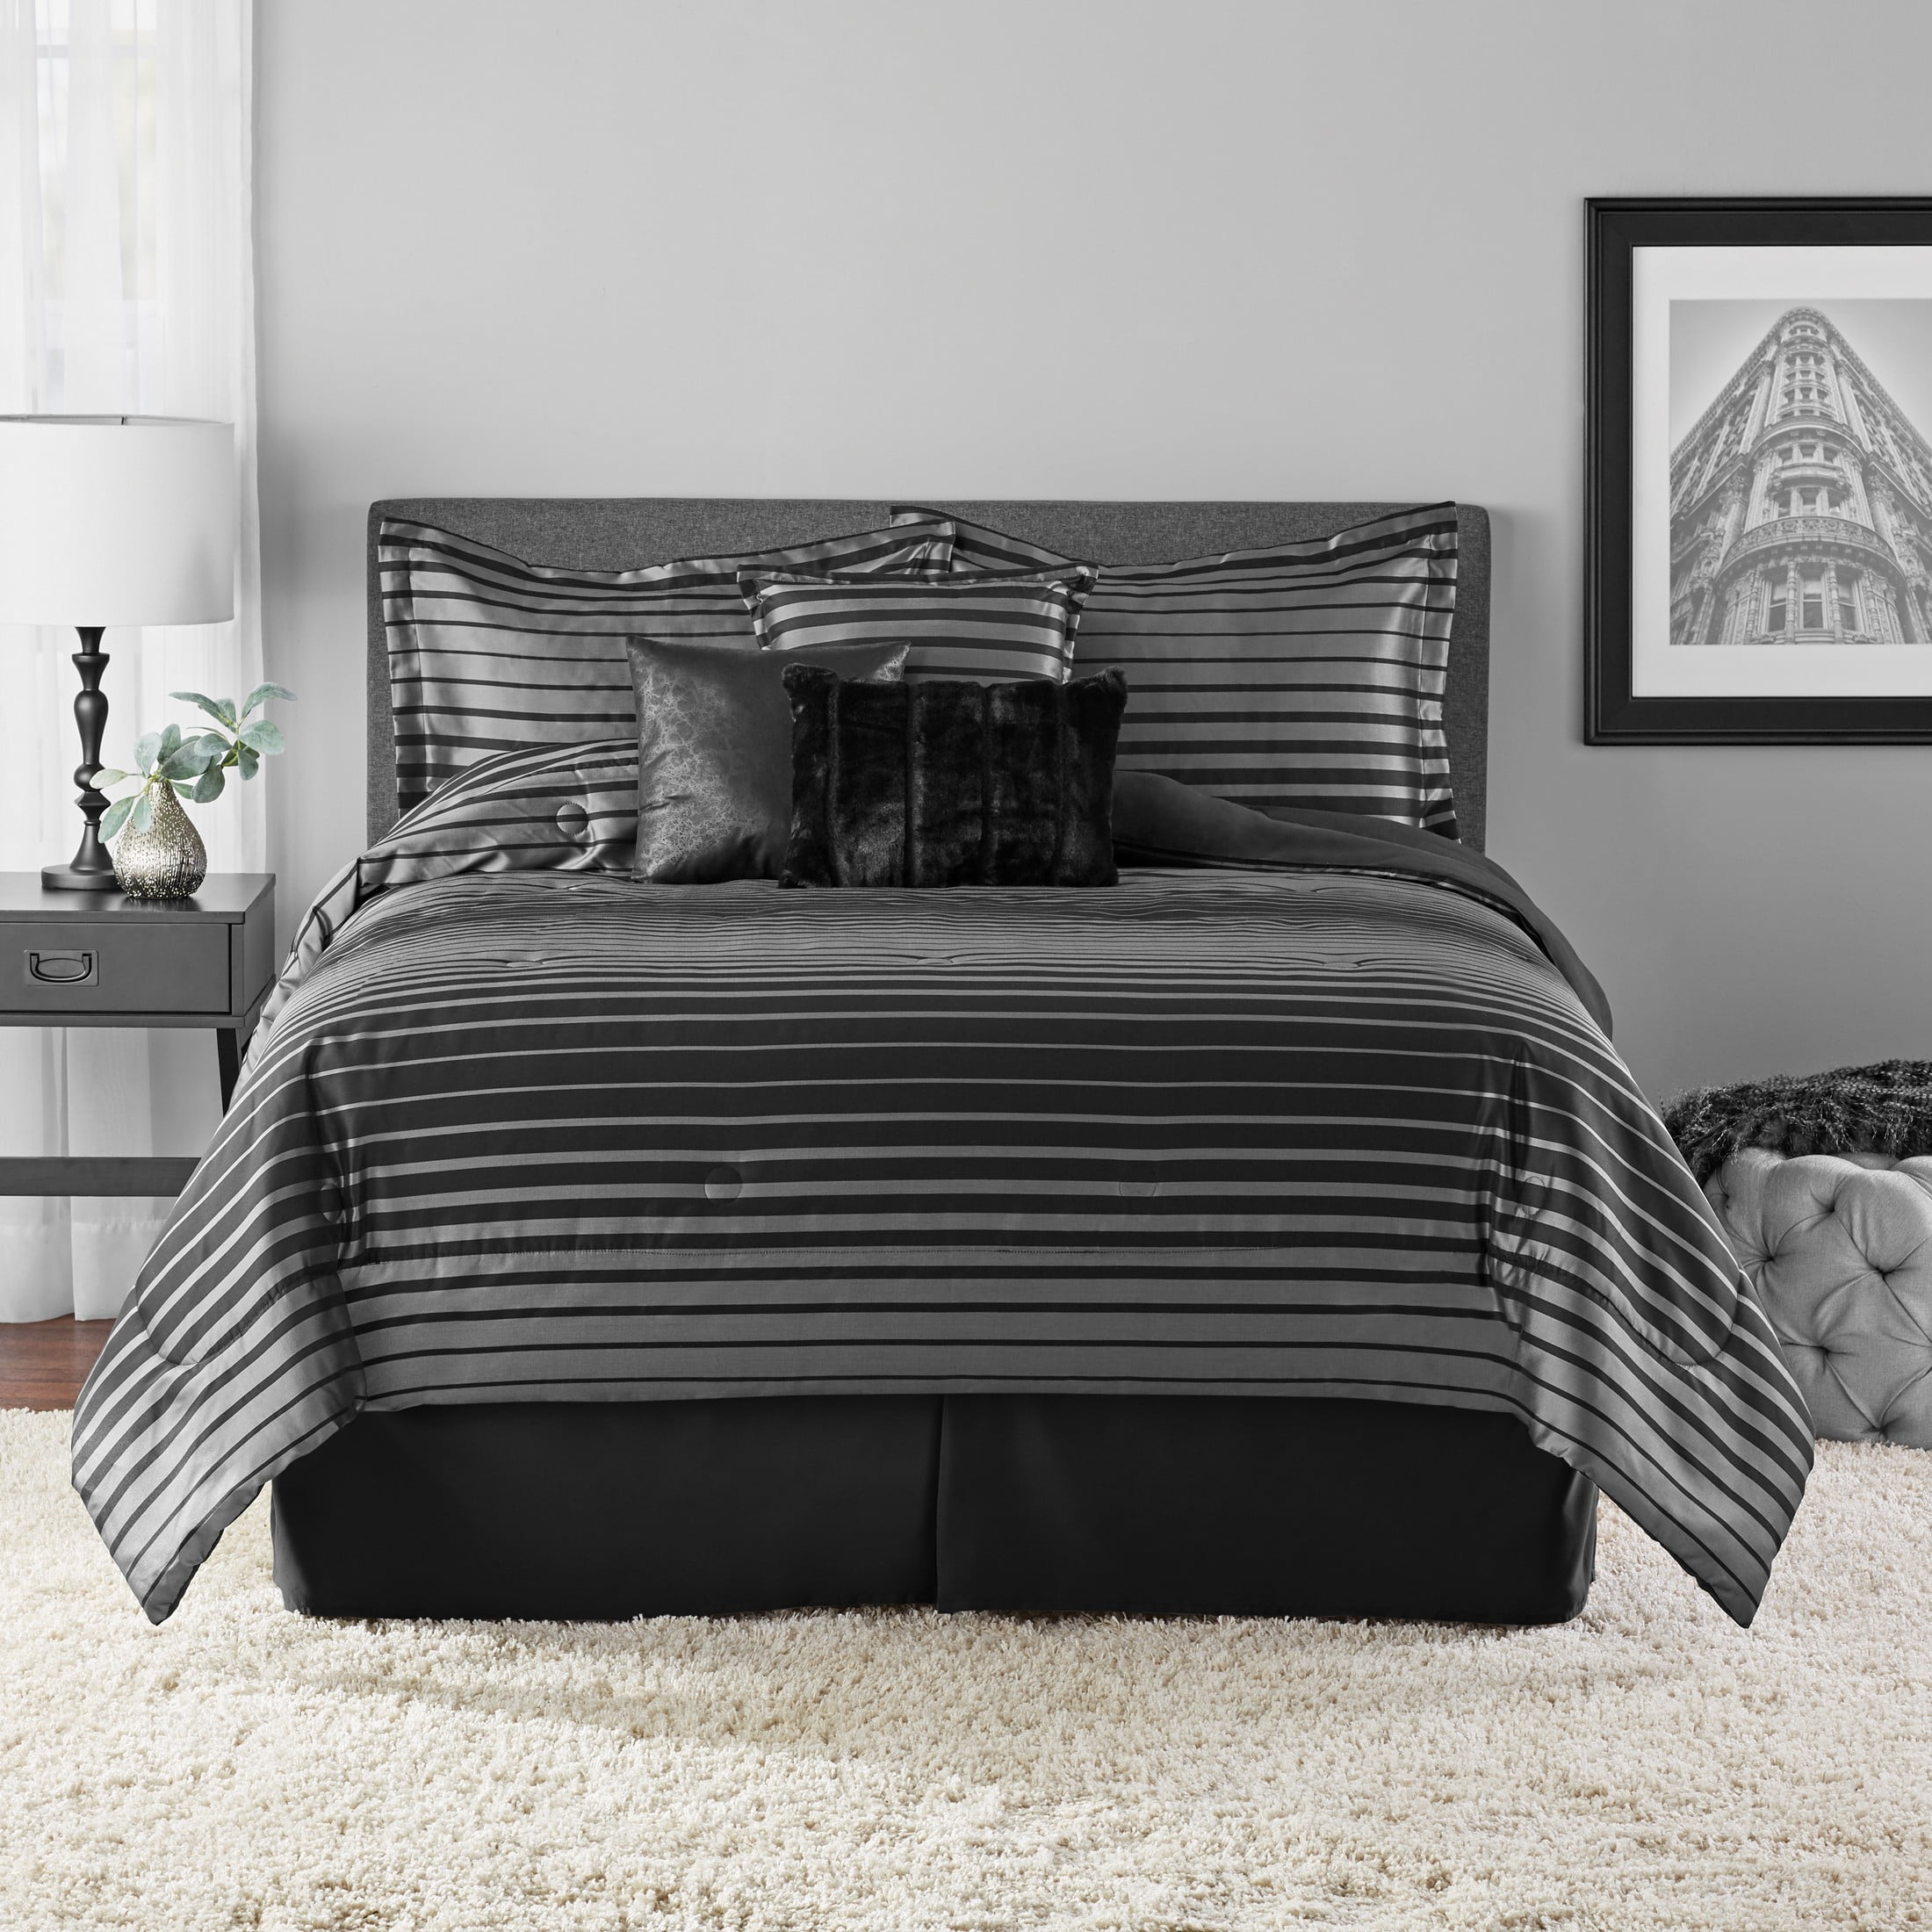 Mainstays 7 Piece Midnight Comforter, Silver And Black King Size Bedding